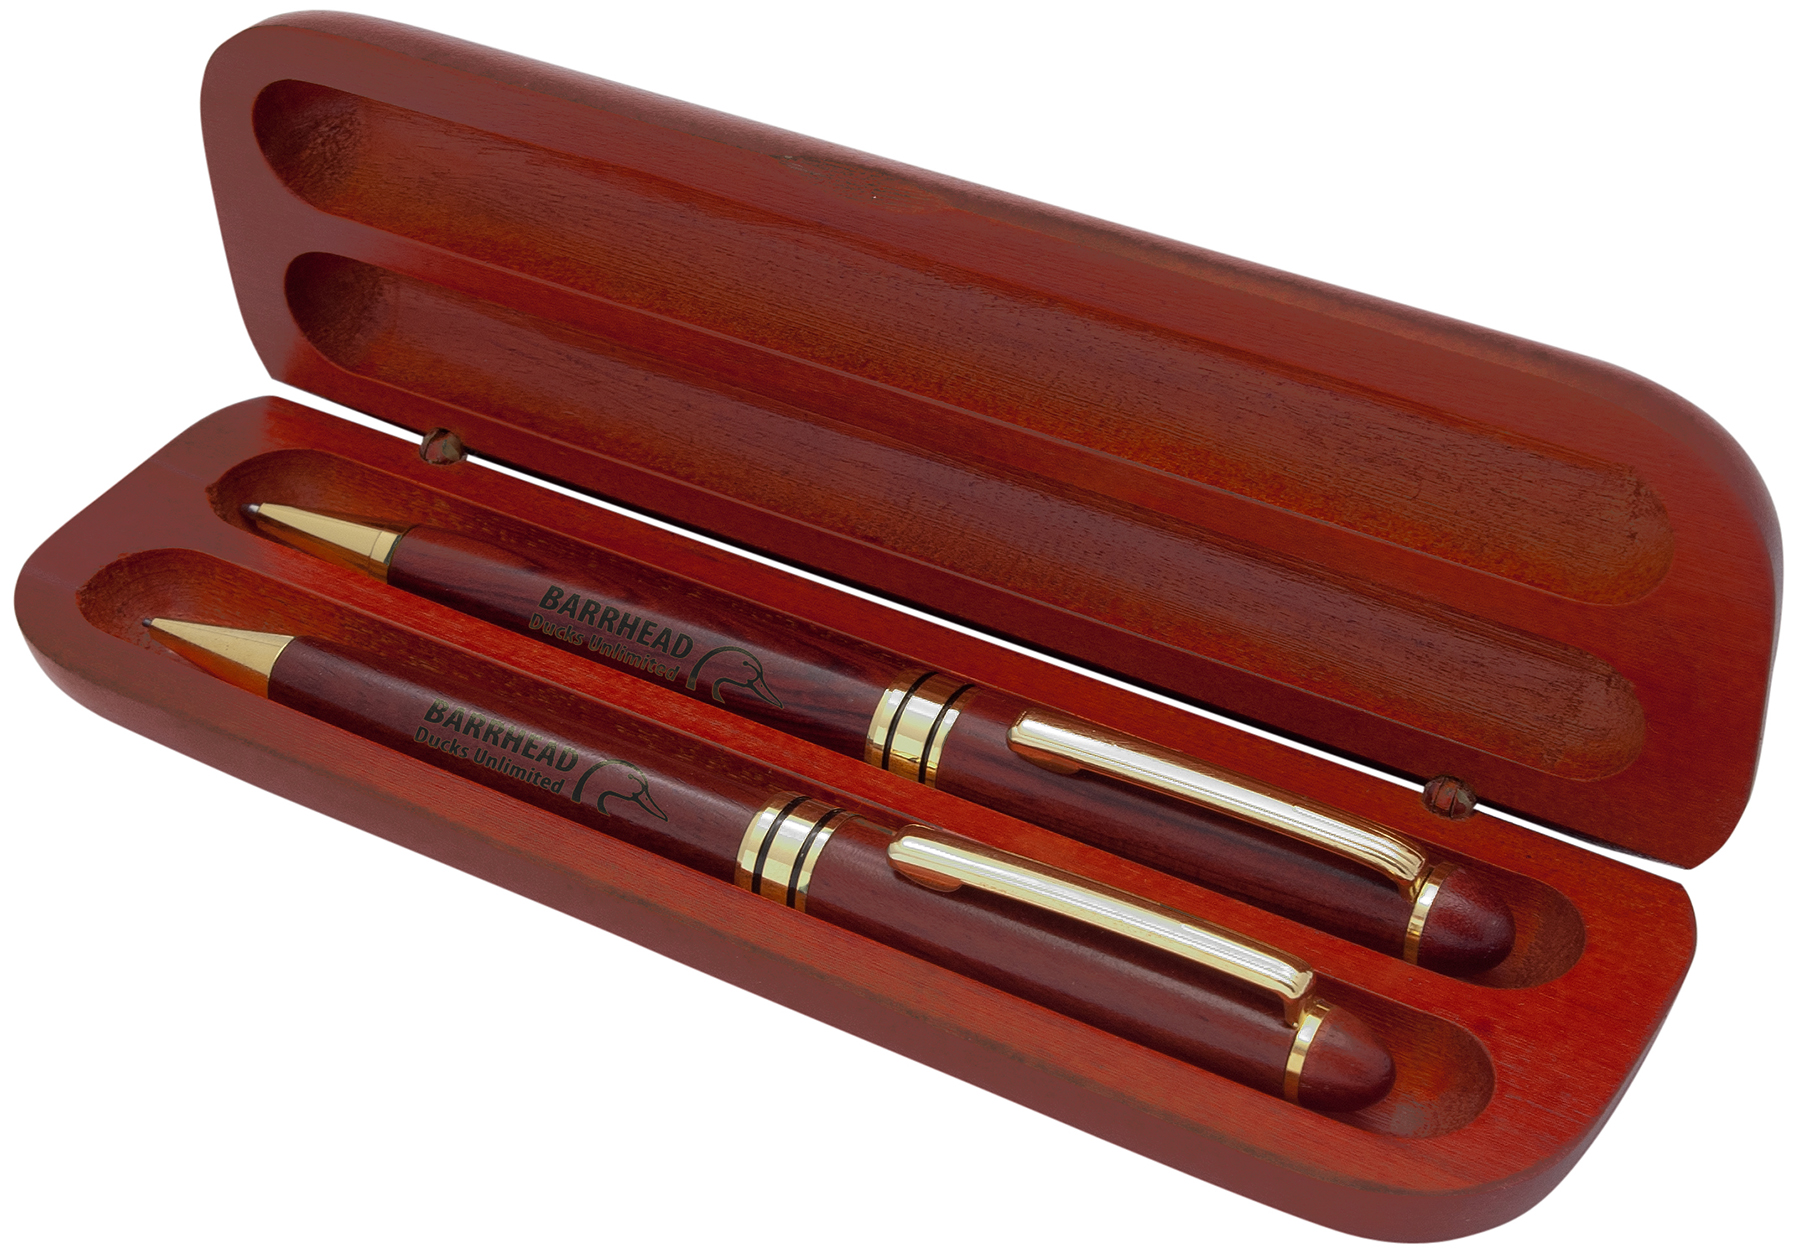 Maple Pen or Pencil Case - Single Hinged Case Gift Box